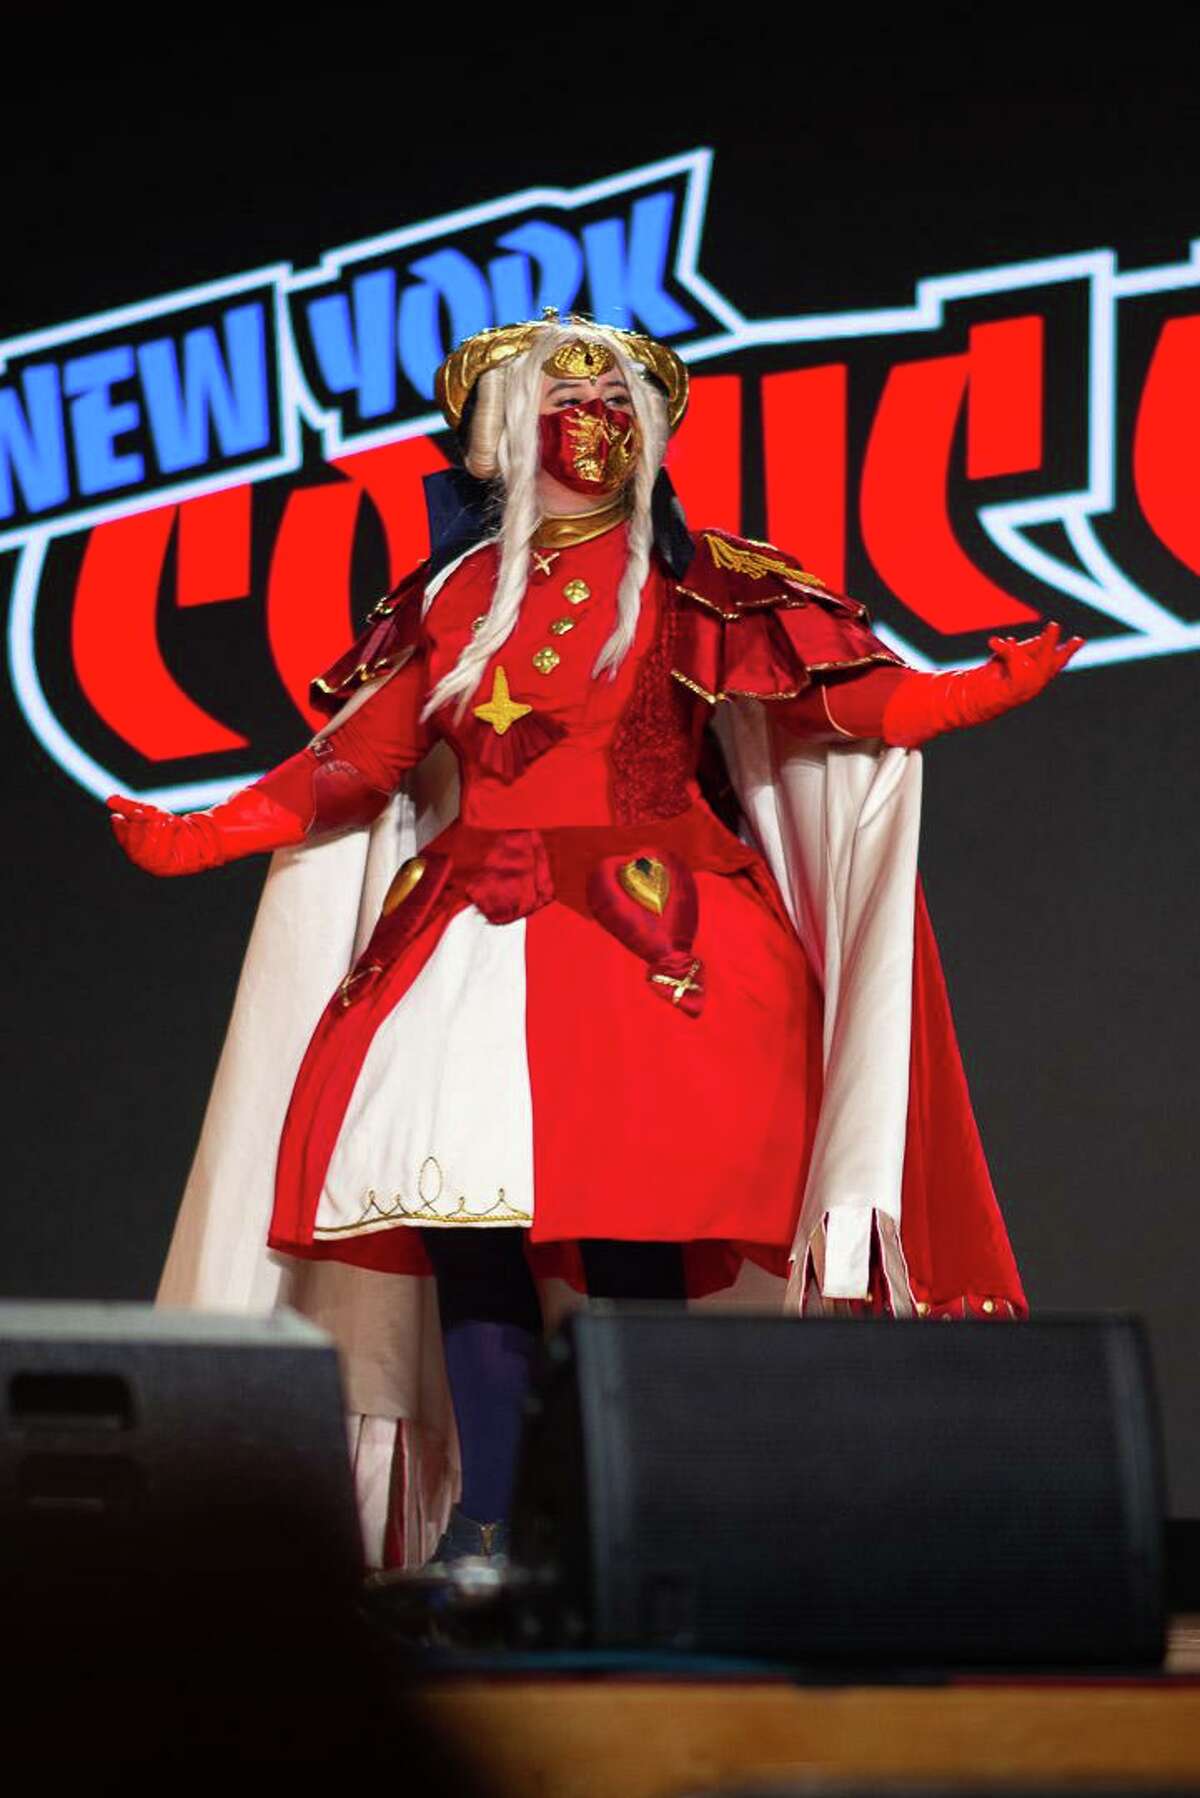 Irish Harvey walks the stage at the New York Comic Con Costume Central Championship of Cosplay, where she won third place for her portrayal of Edelgard from the video game Fire Emblem: Three Houses on Saturday, Oct. 9, 2021.